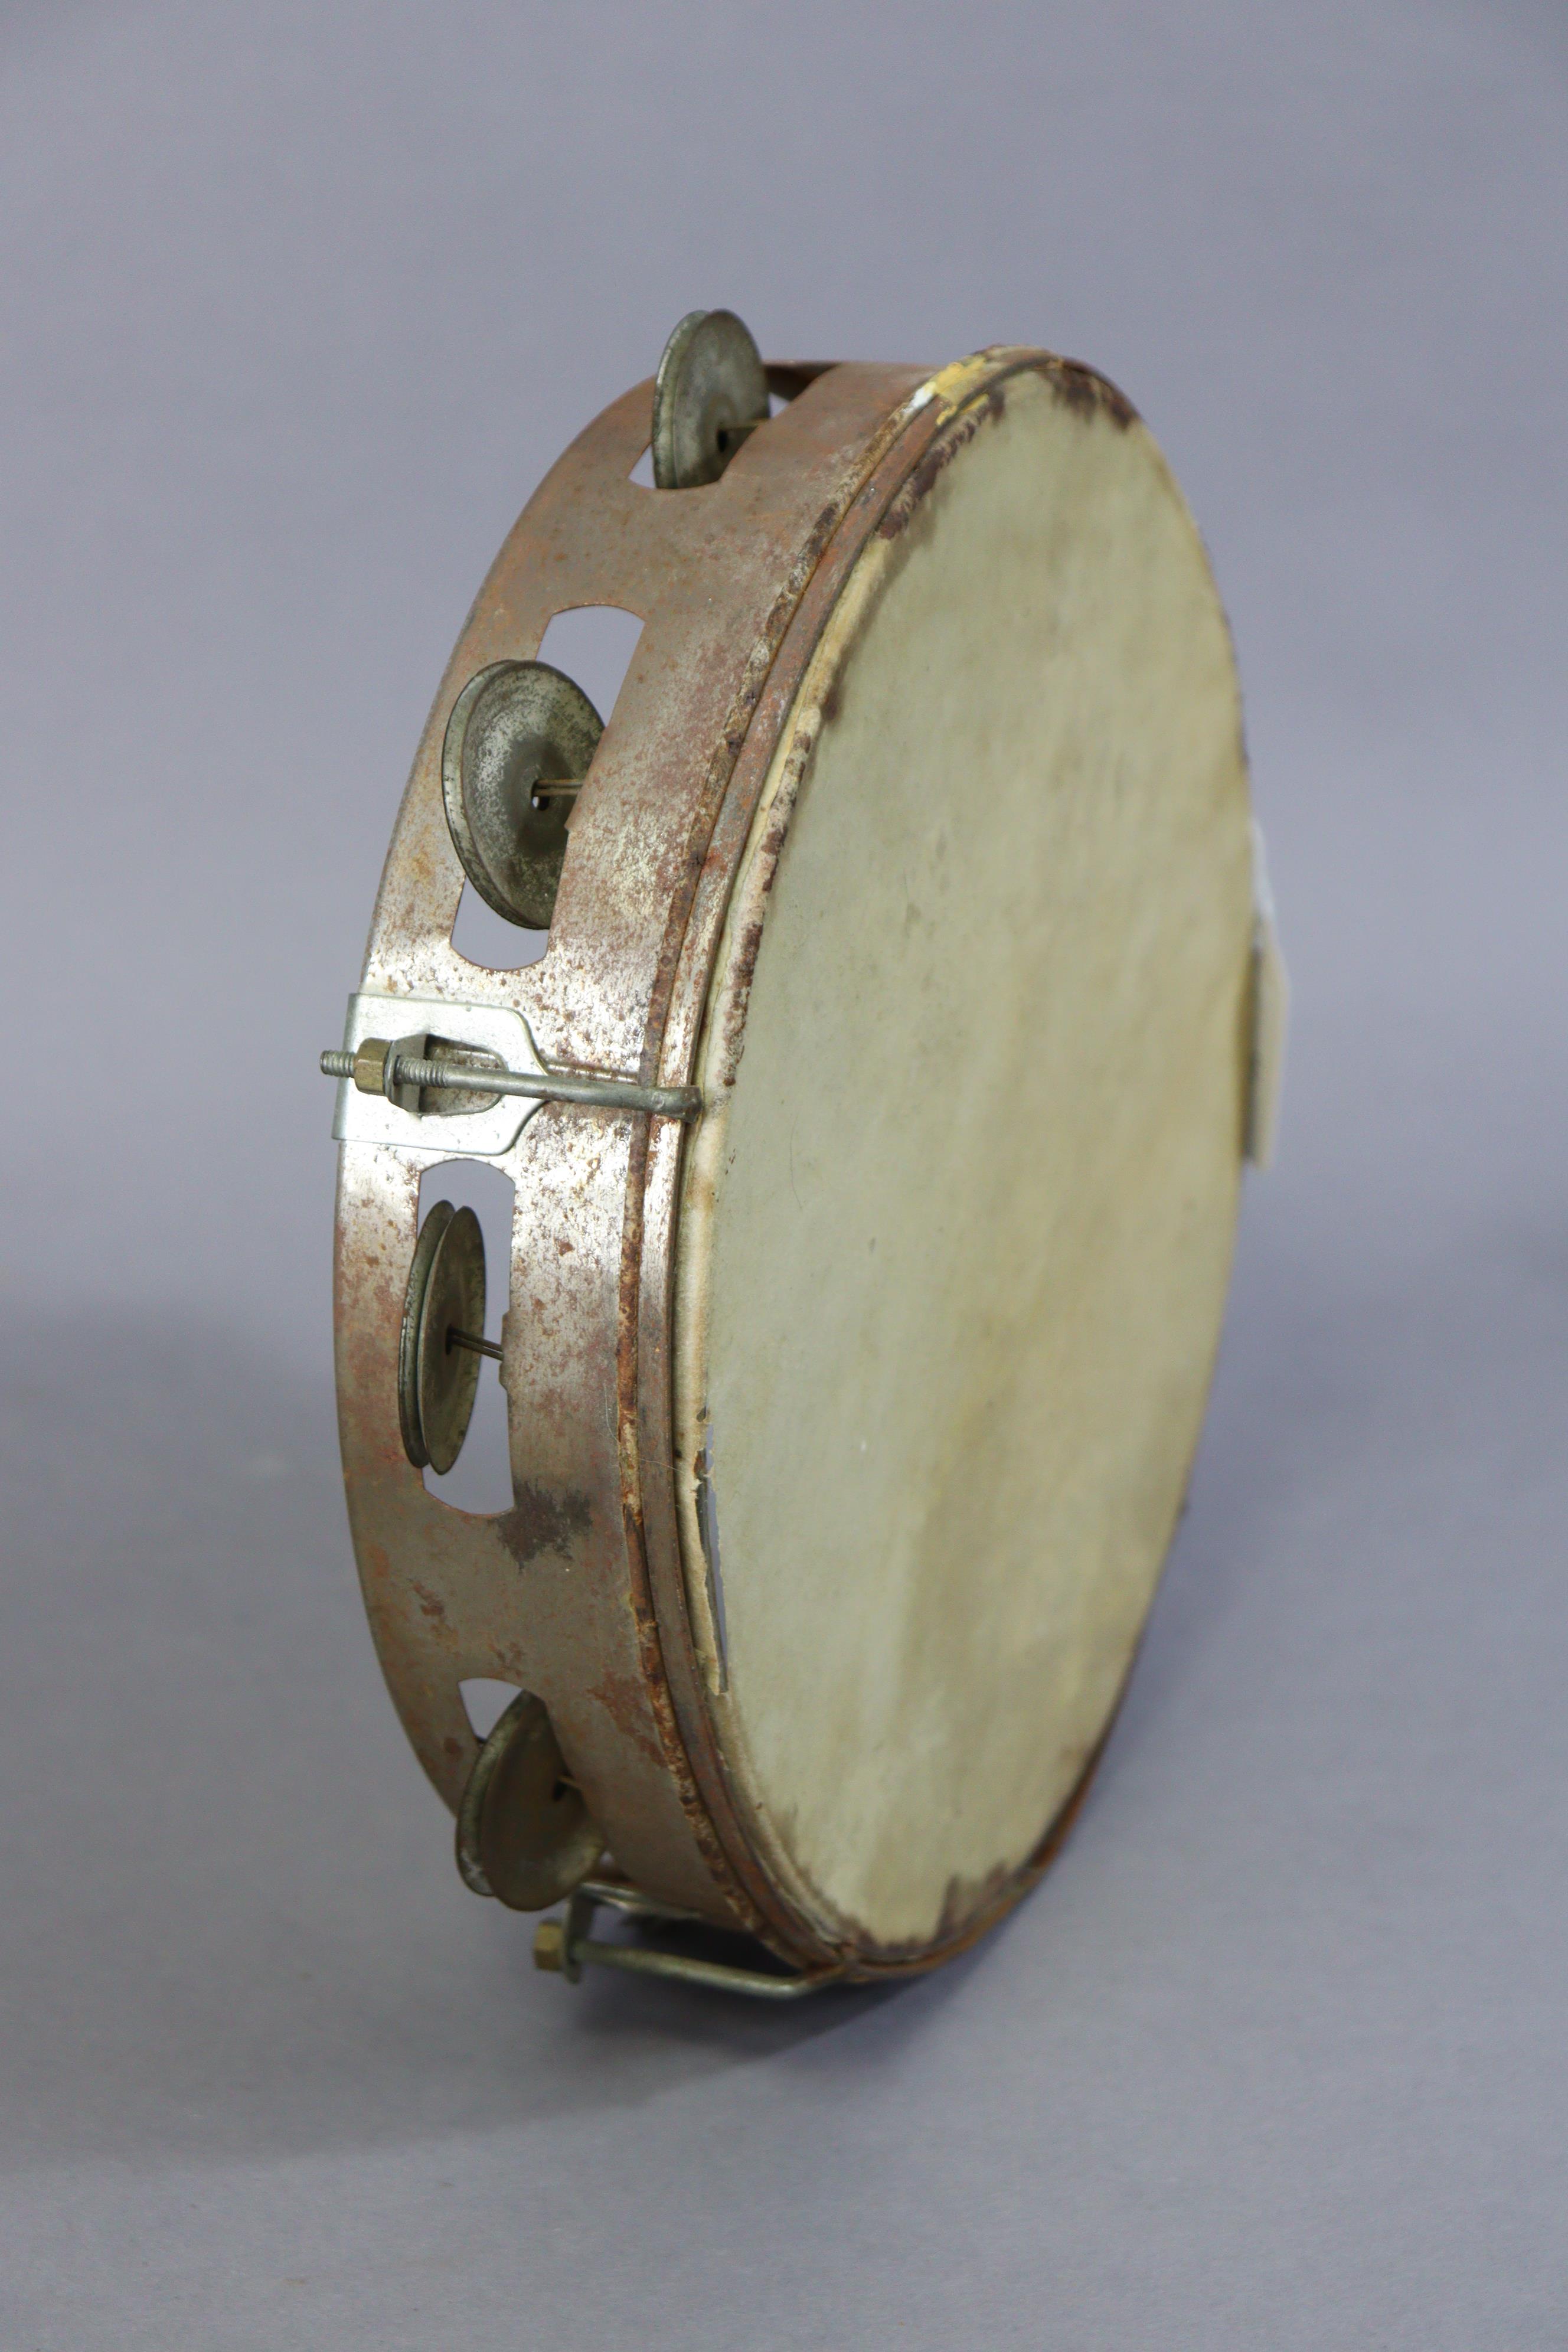 A Ridgmount portable gramophone in a cream finish fibre-covered case; together with a tambourine. - Image 7 of 7